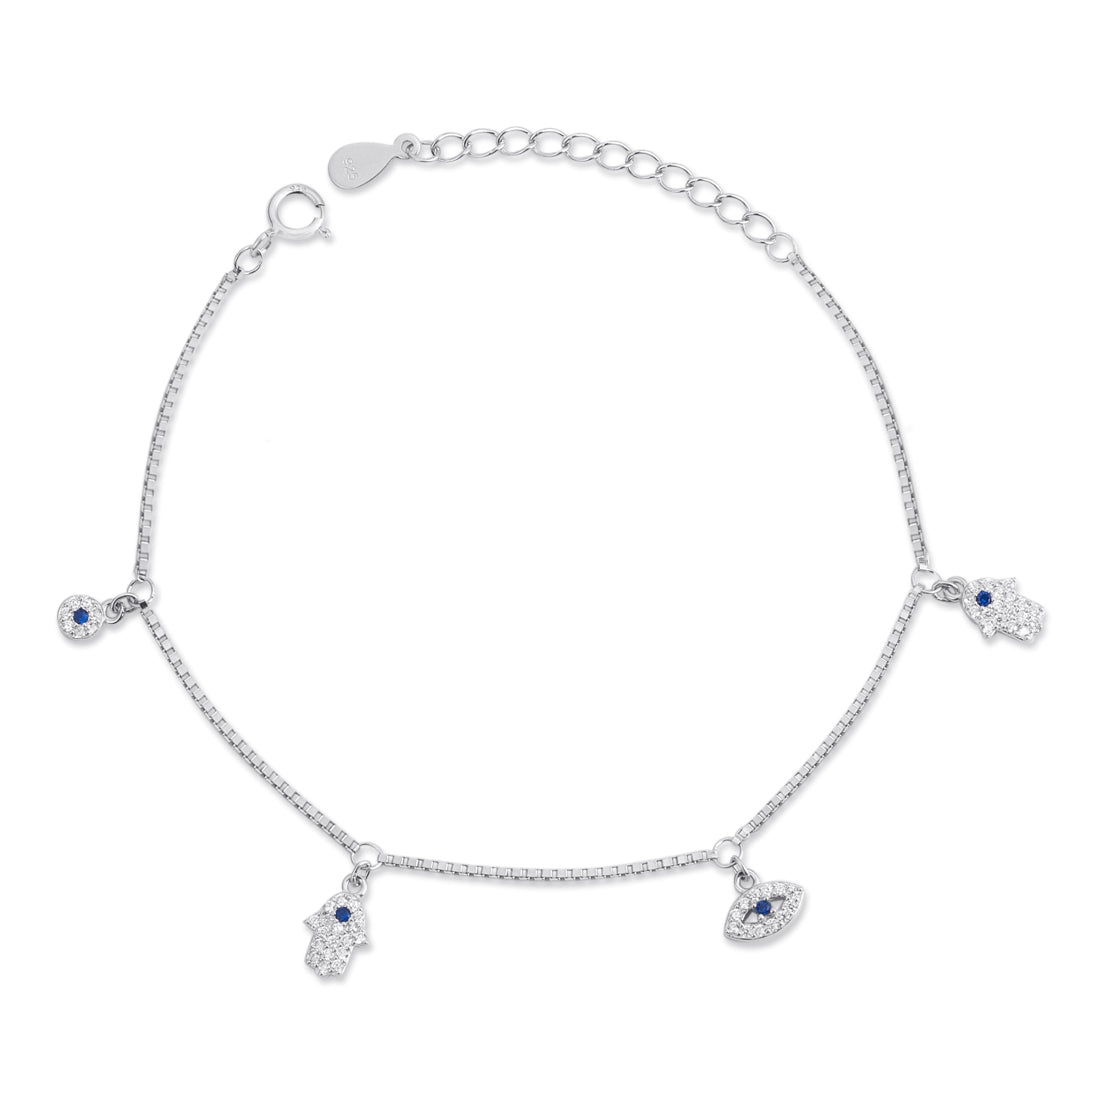 Protective Charms Rhodium Plated 925 Sterling Silver Bracelet